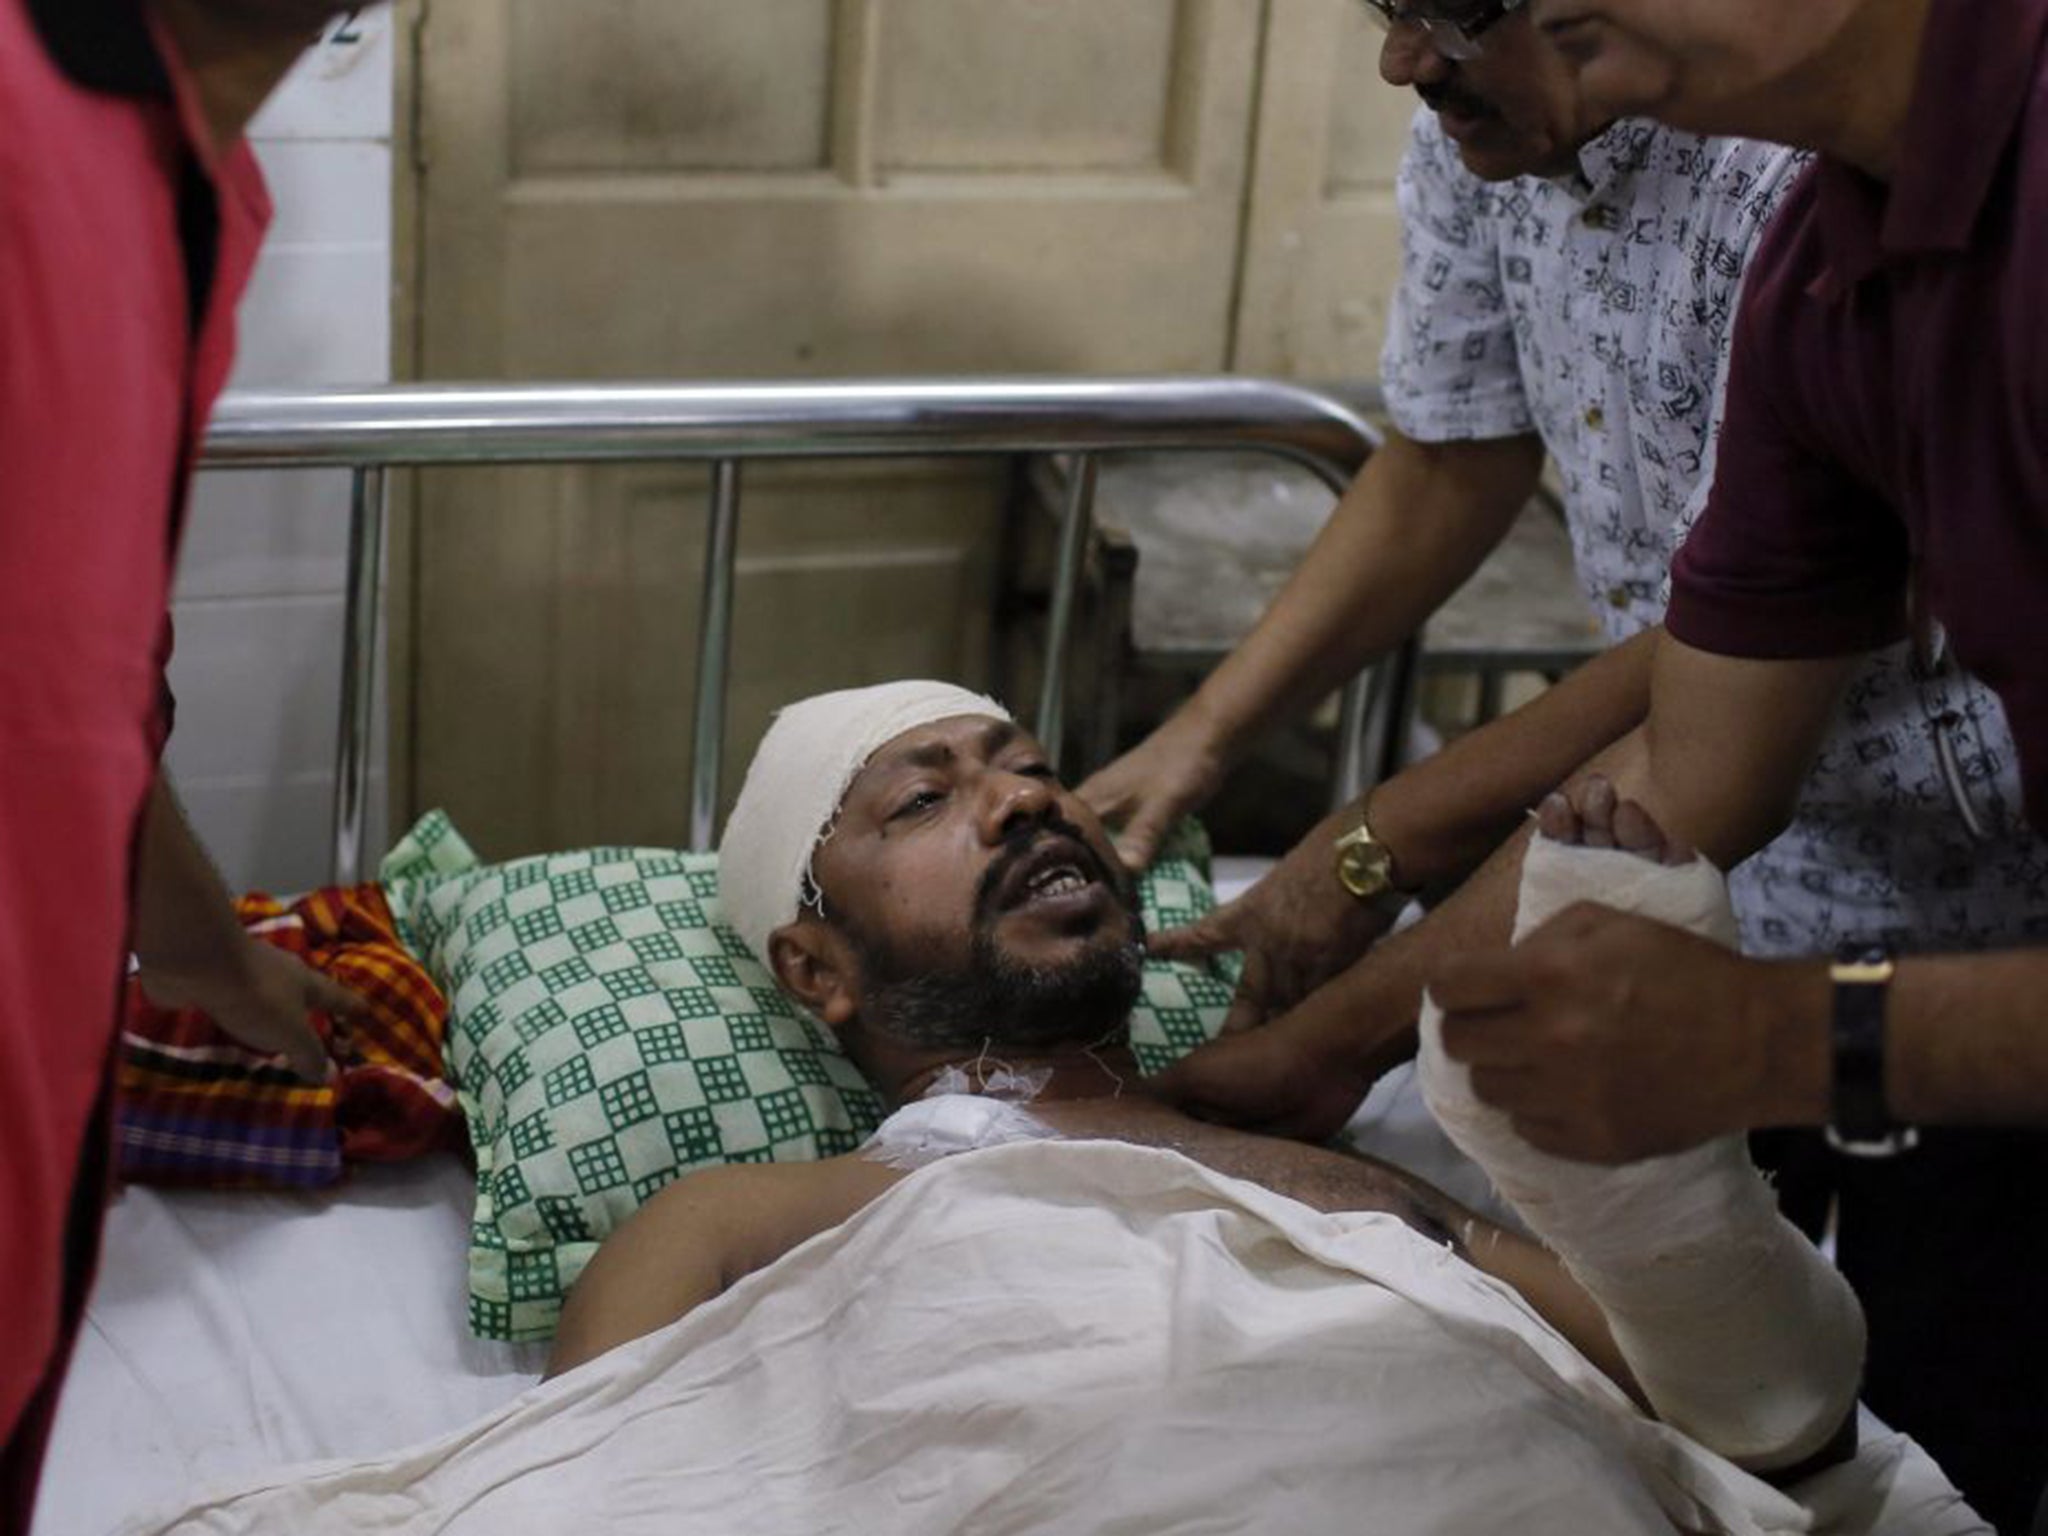 One of the casualties in the knife and gun attacks in Dhaka